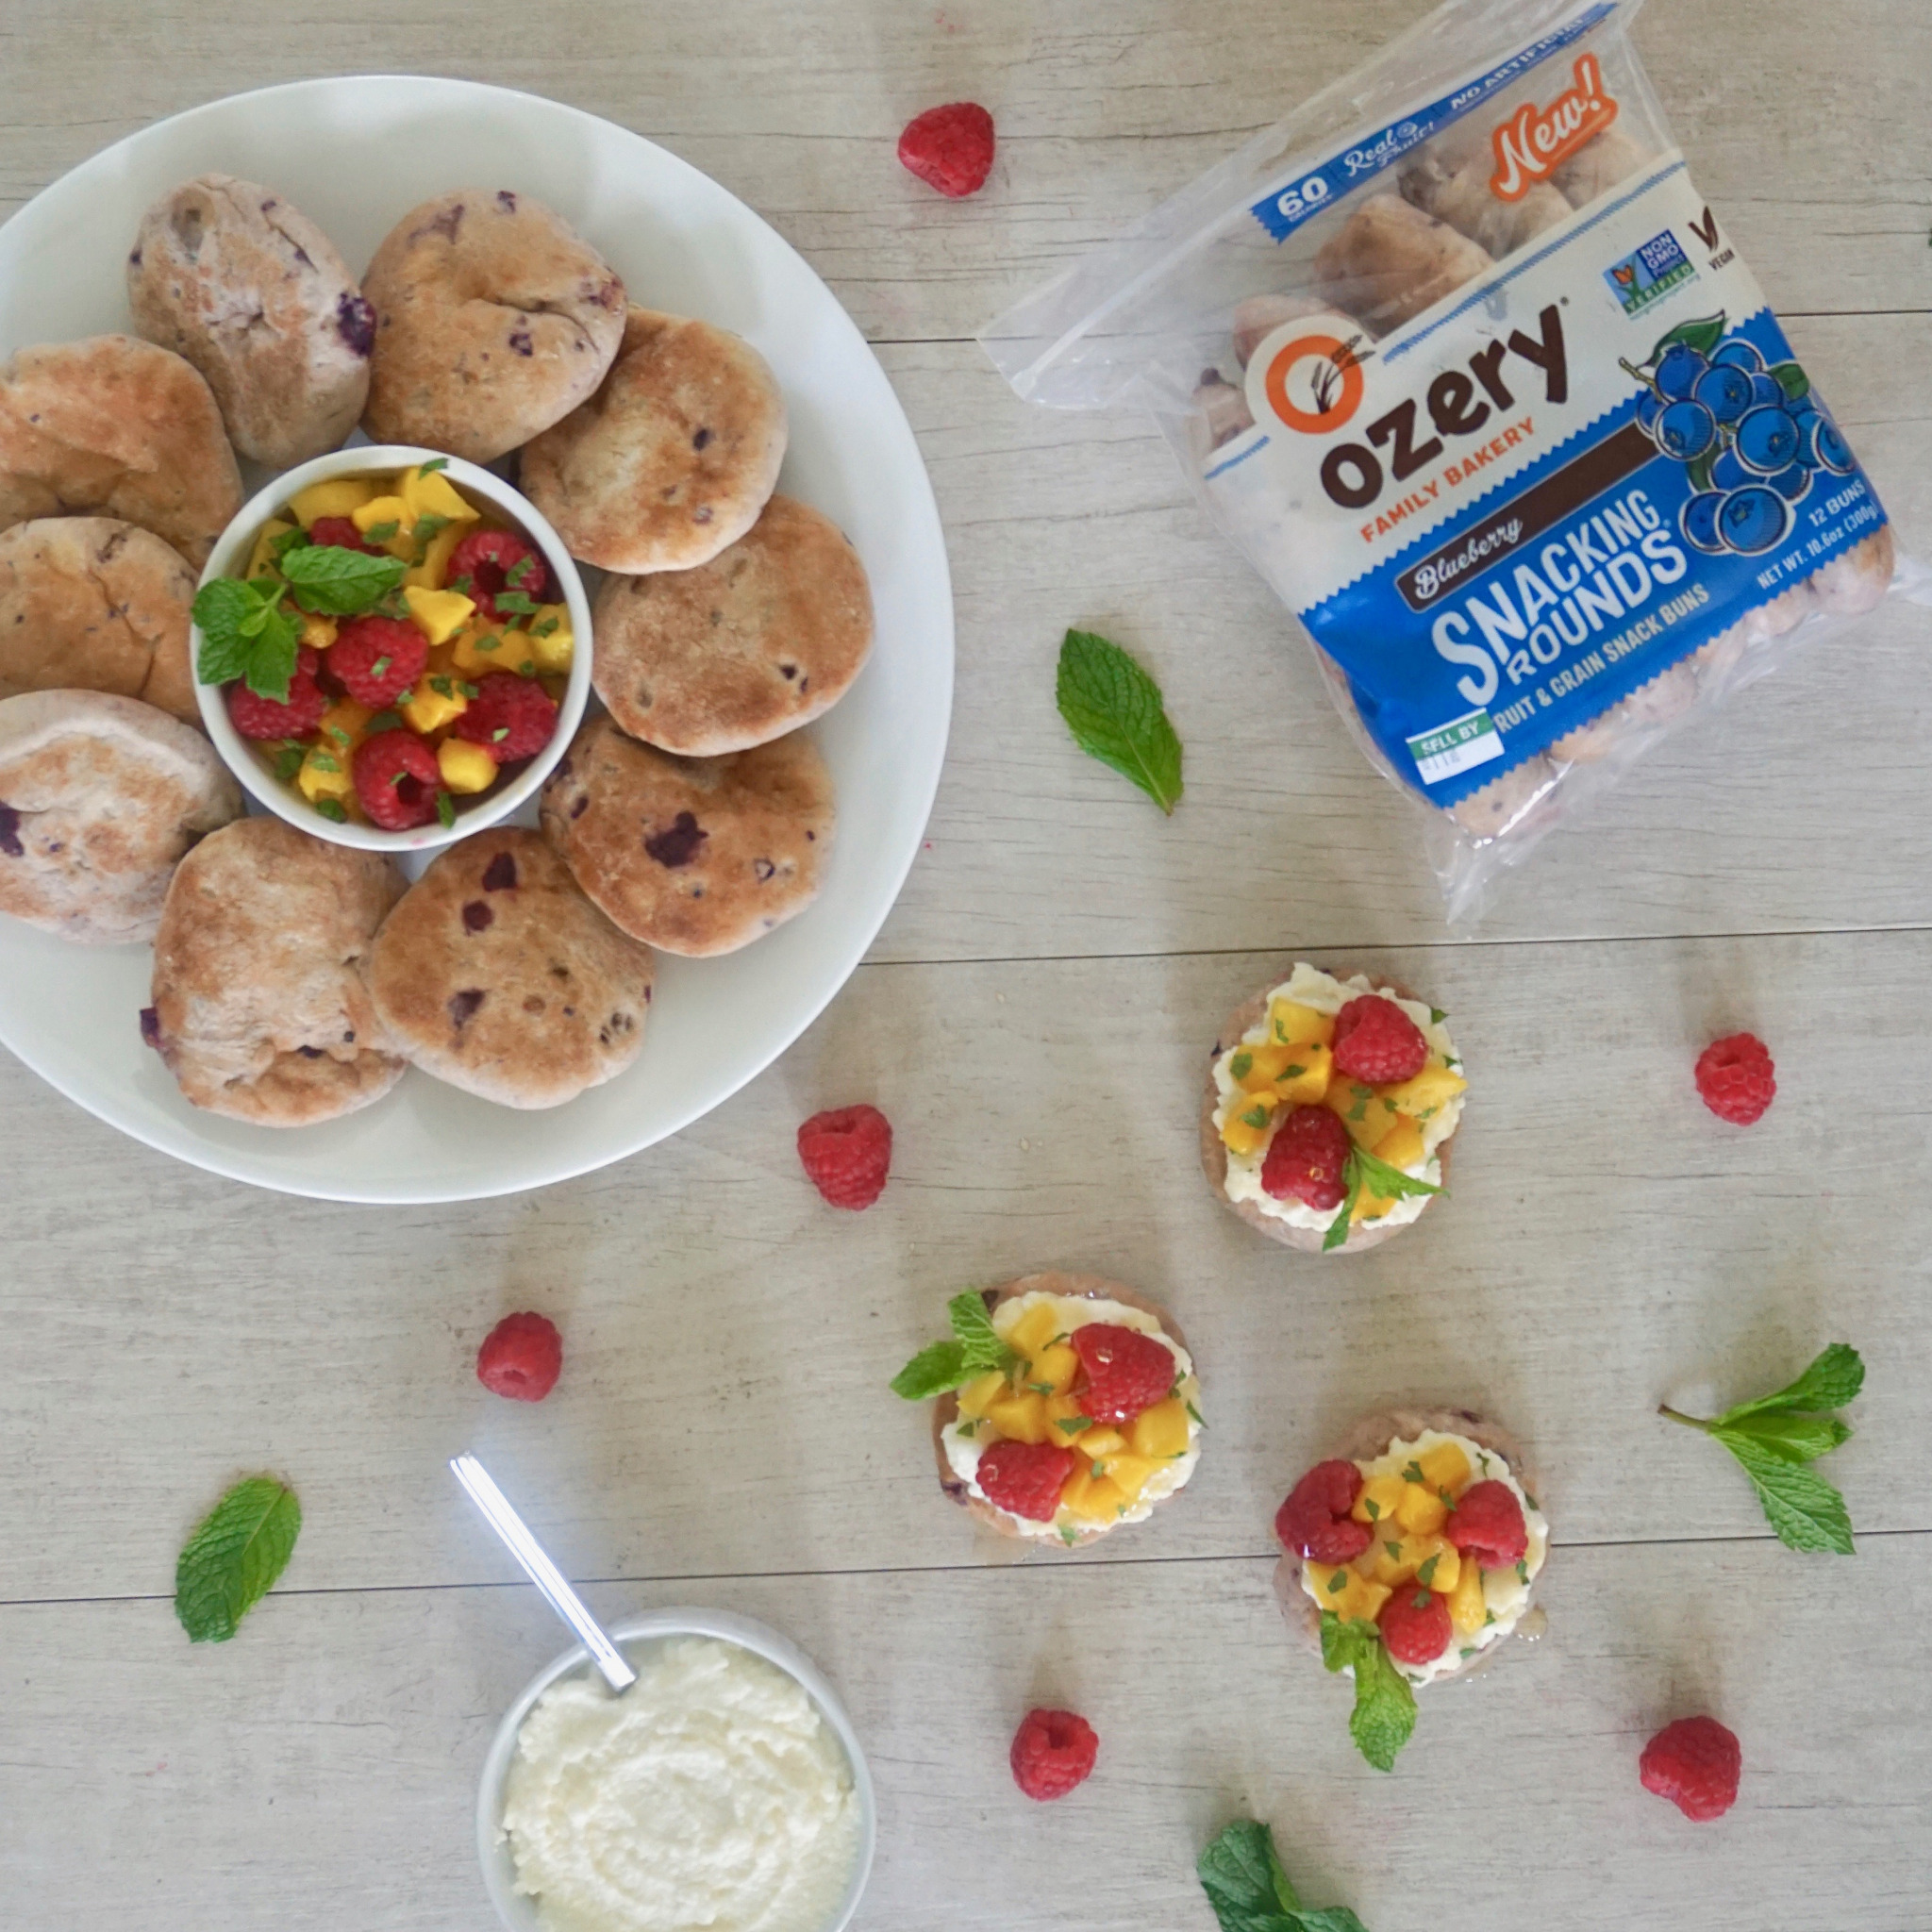 Ozery snacking rounds blueberry topped with fruit